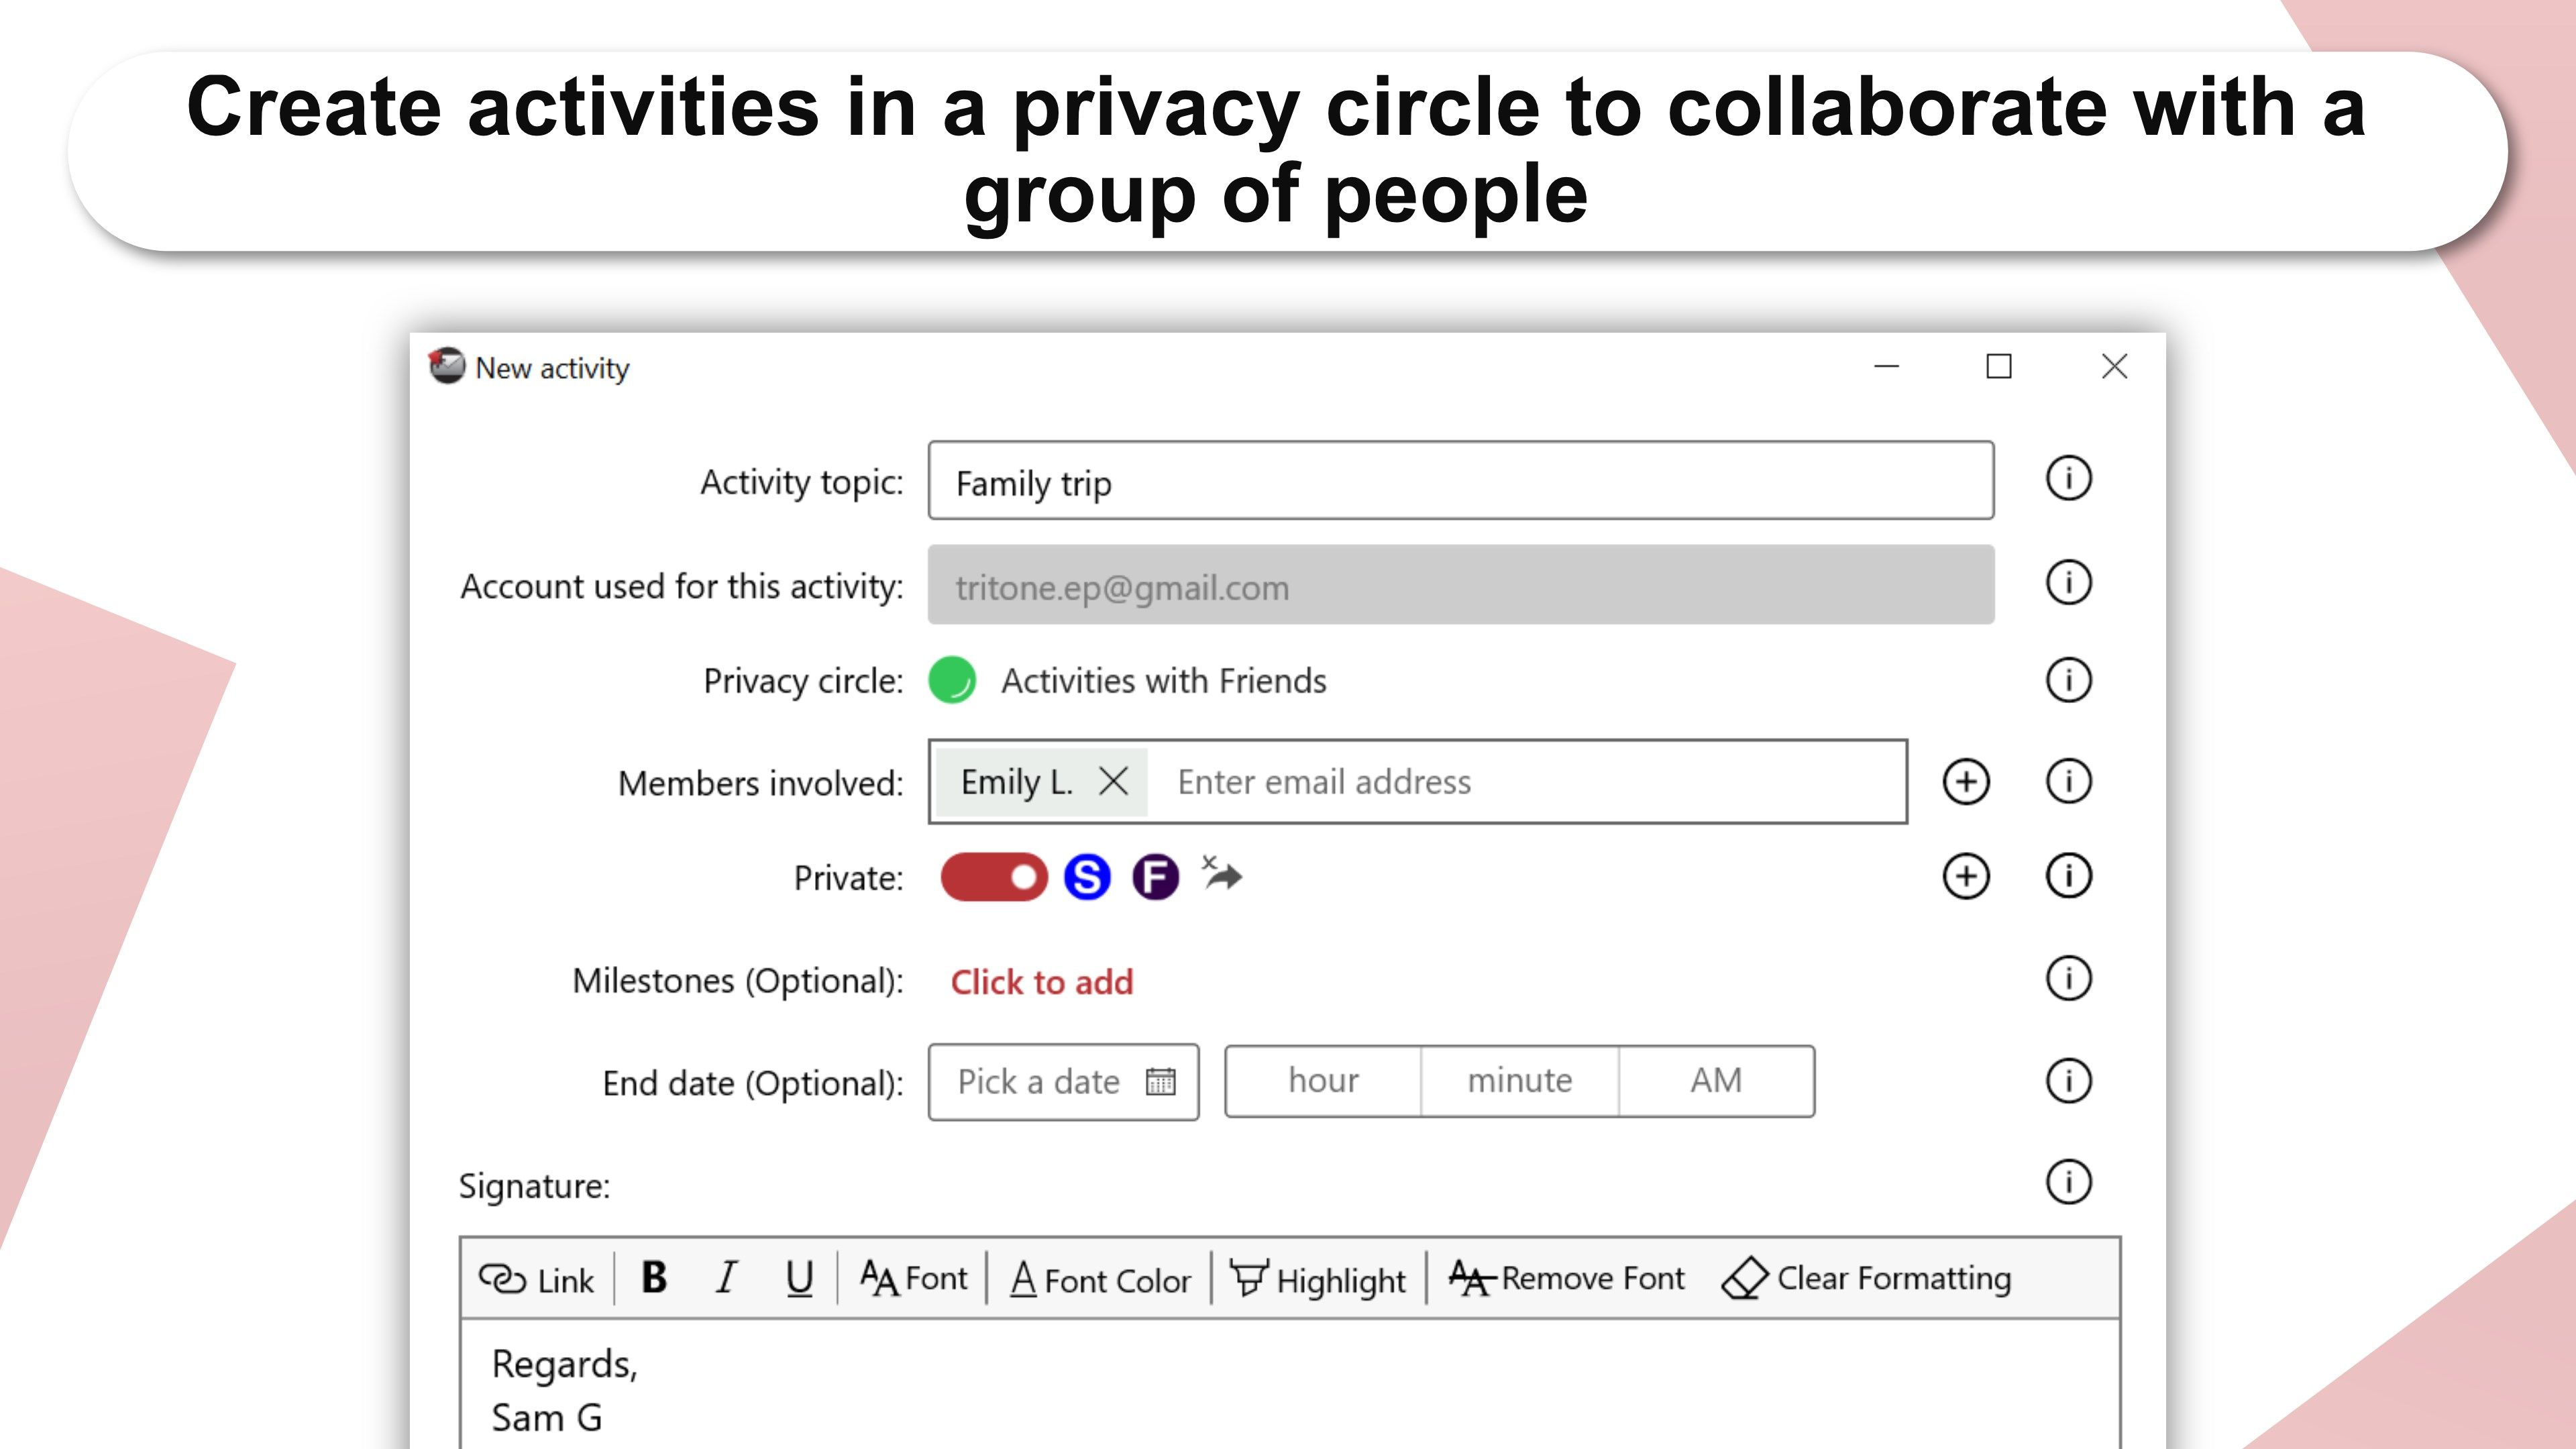 Create activities in a privacy circle to collaborate with a group of people